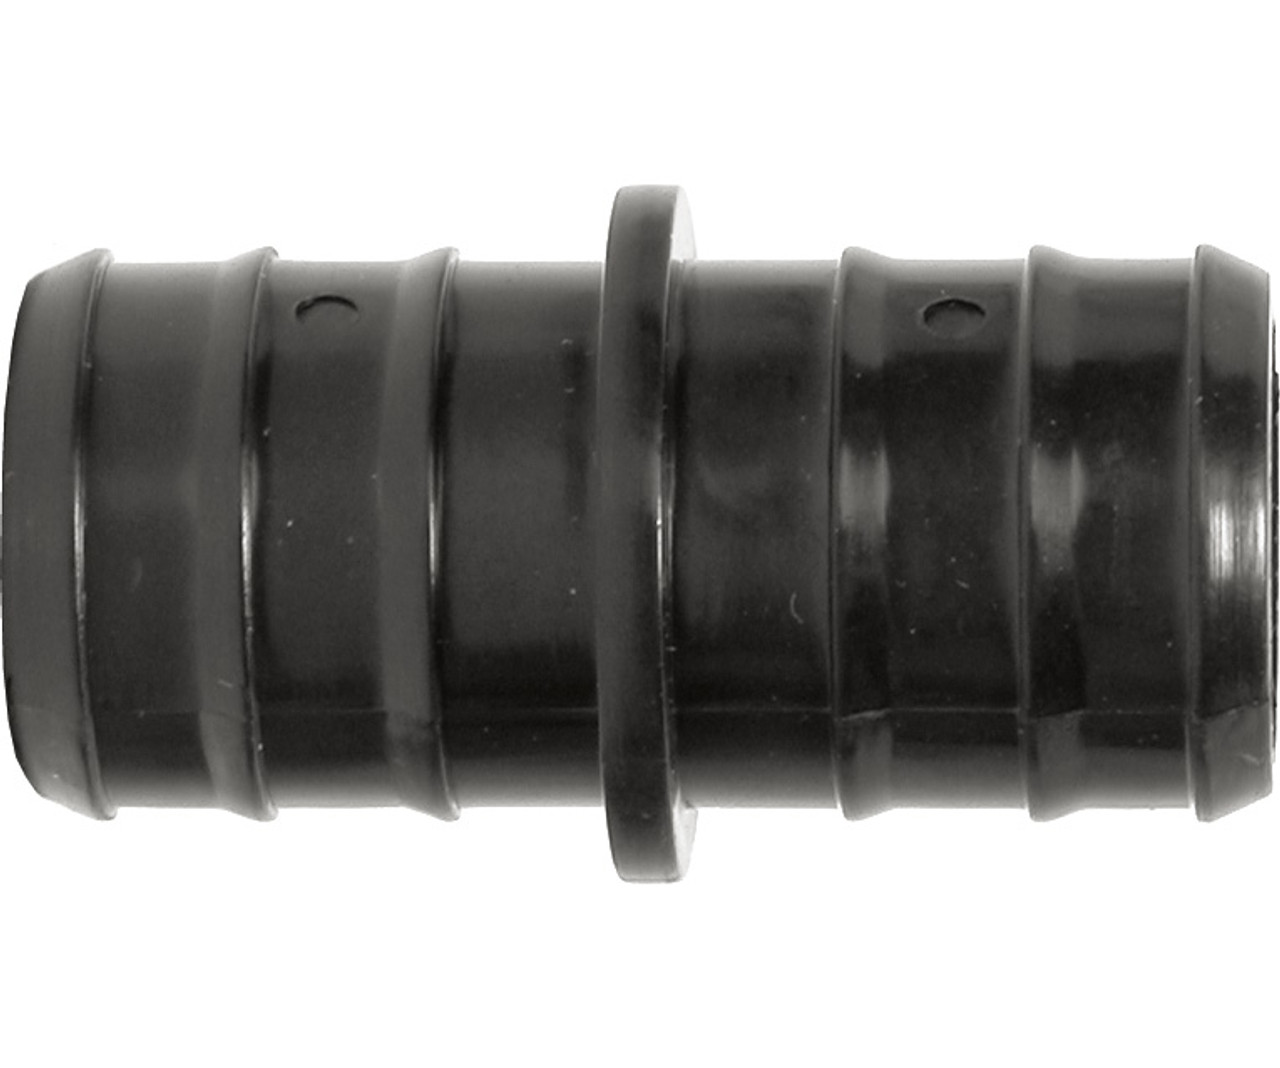 AA 1" Straight Connector, pack of 10